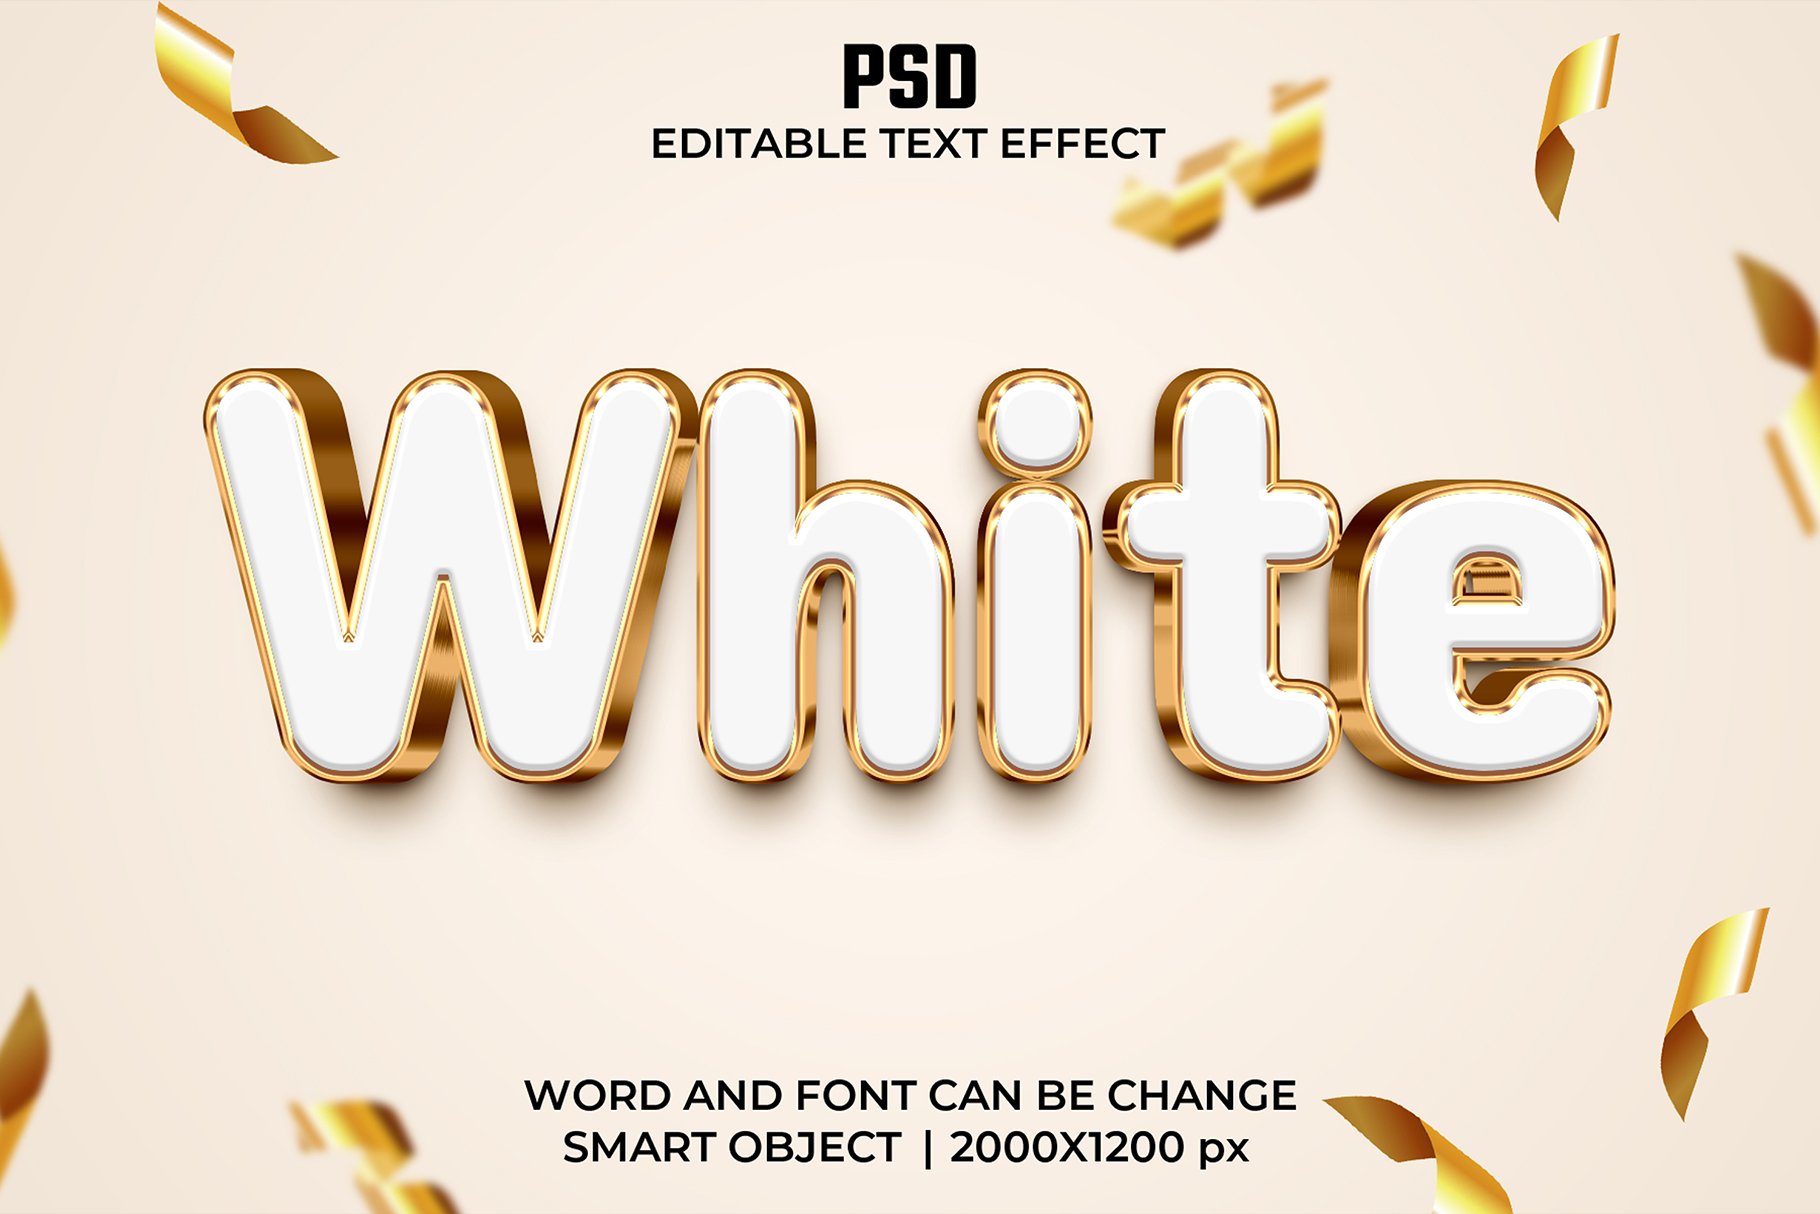 White 3d Editable Text Effect Stylecover image.